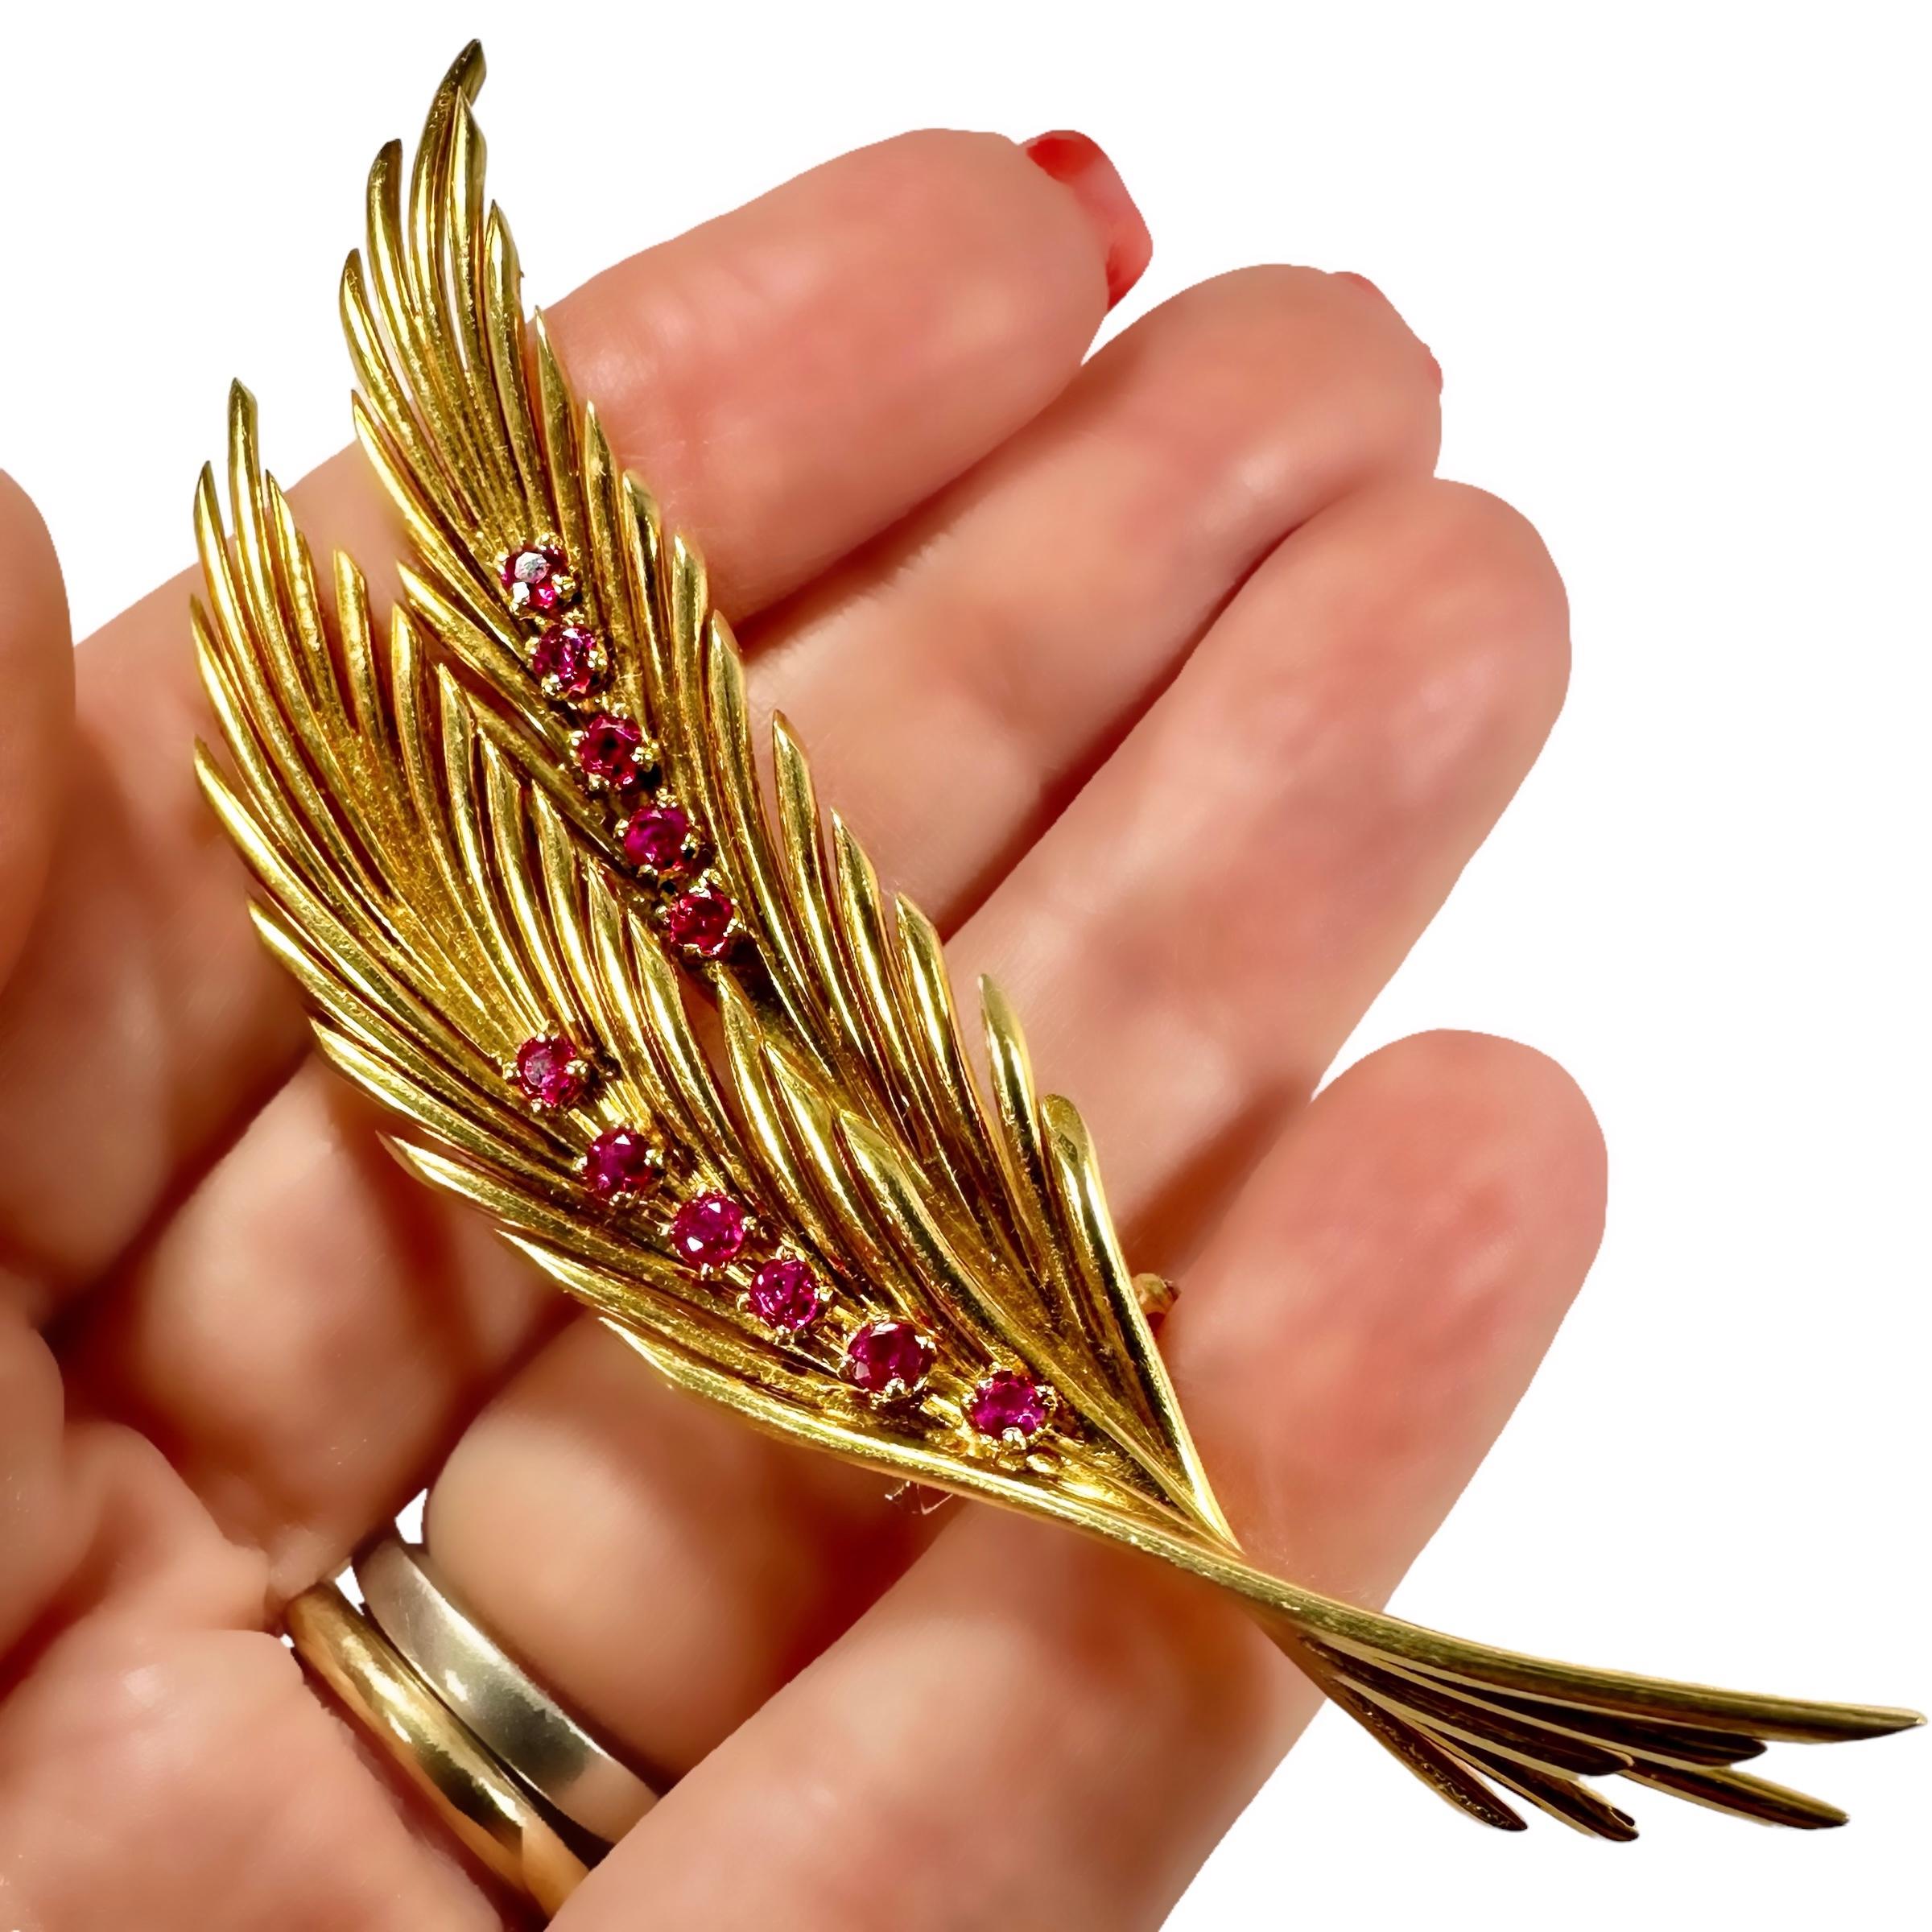 Large Vintage Van Cleef & Arpels Gold and Ruby Foliate Brooch 3 1/8 Inches Long For Sale 3